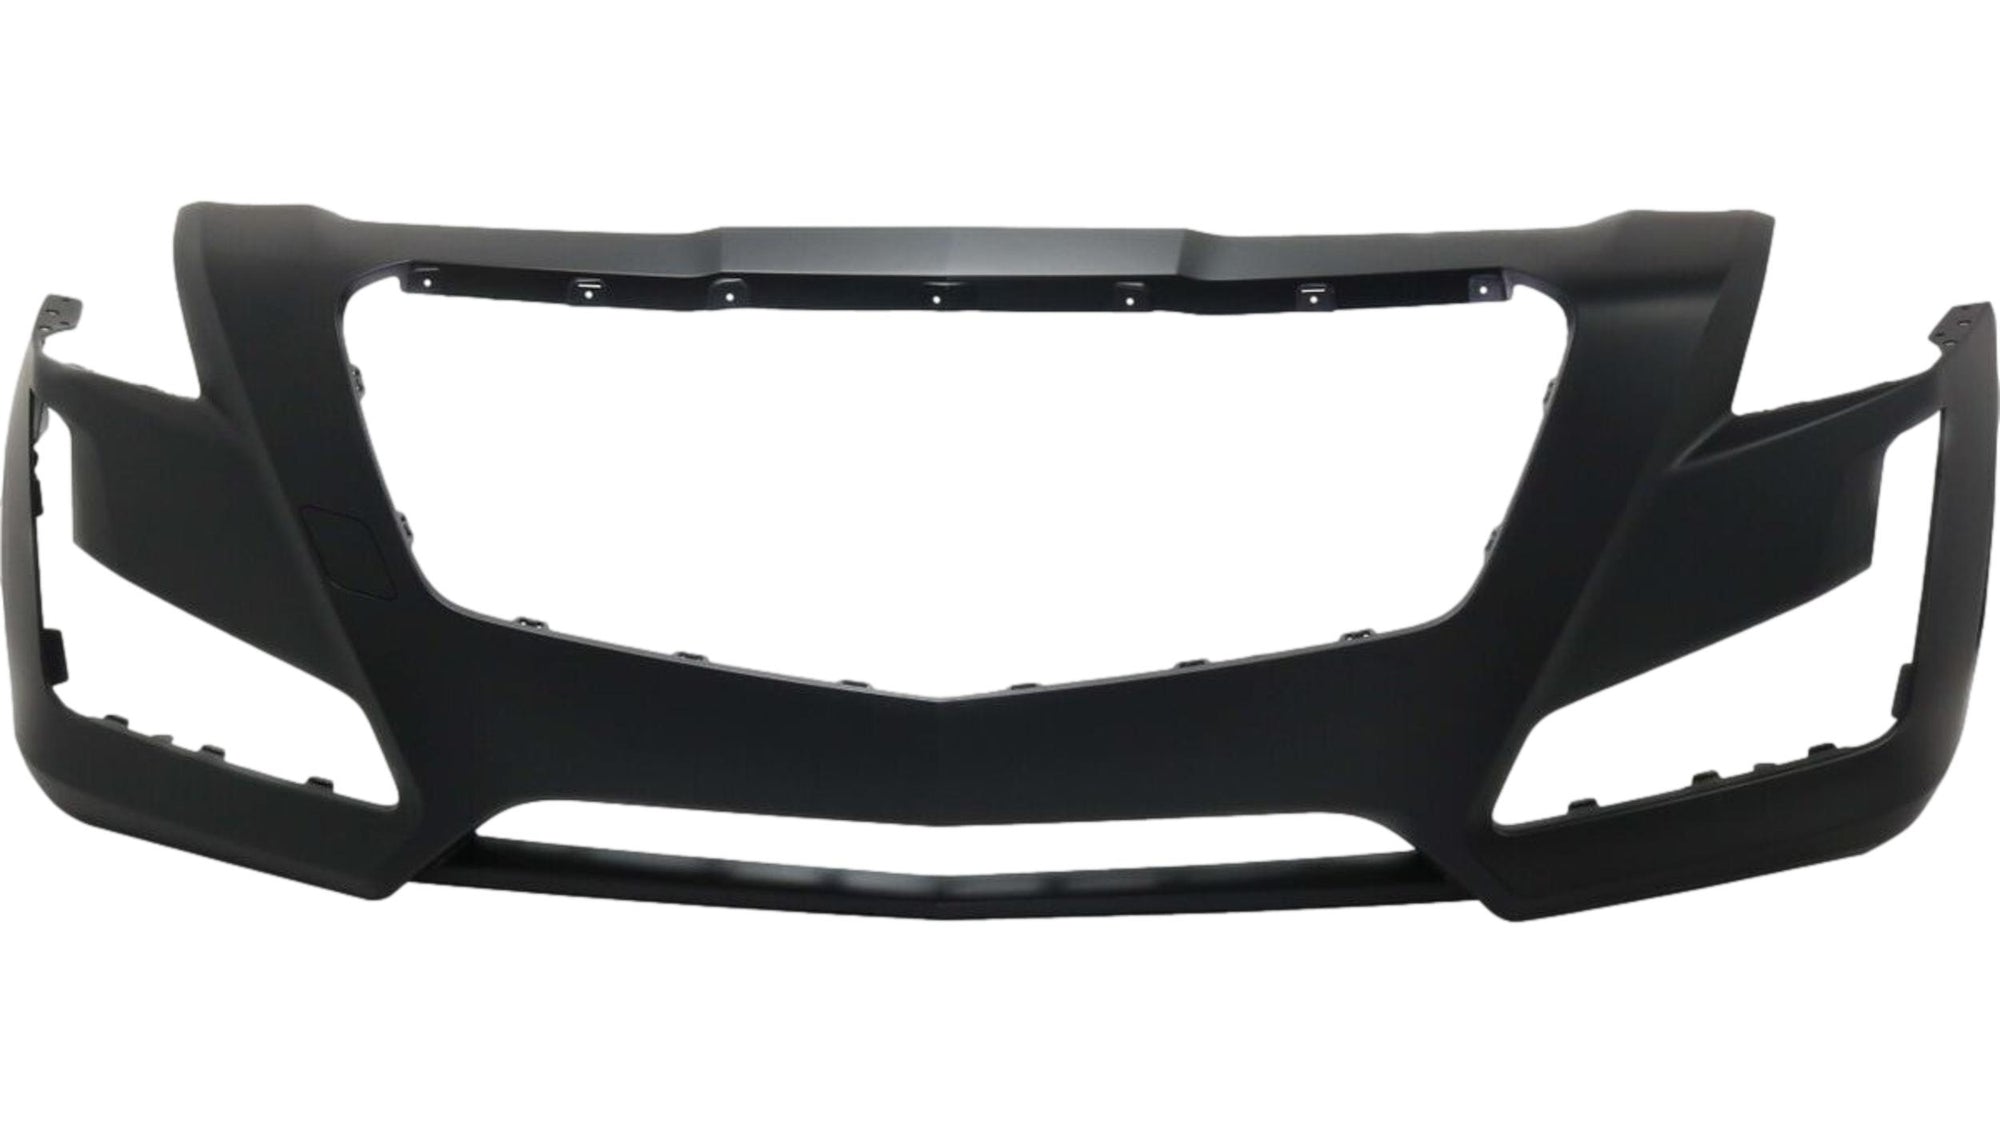 2014-2019 Cadillac CTS Front Bumper Painted (Aftermarket | WITHOUT: Collision Alert and Park Assist Sensor Holes) 84033411 GM1000956